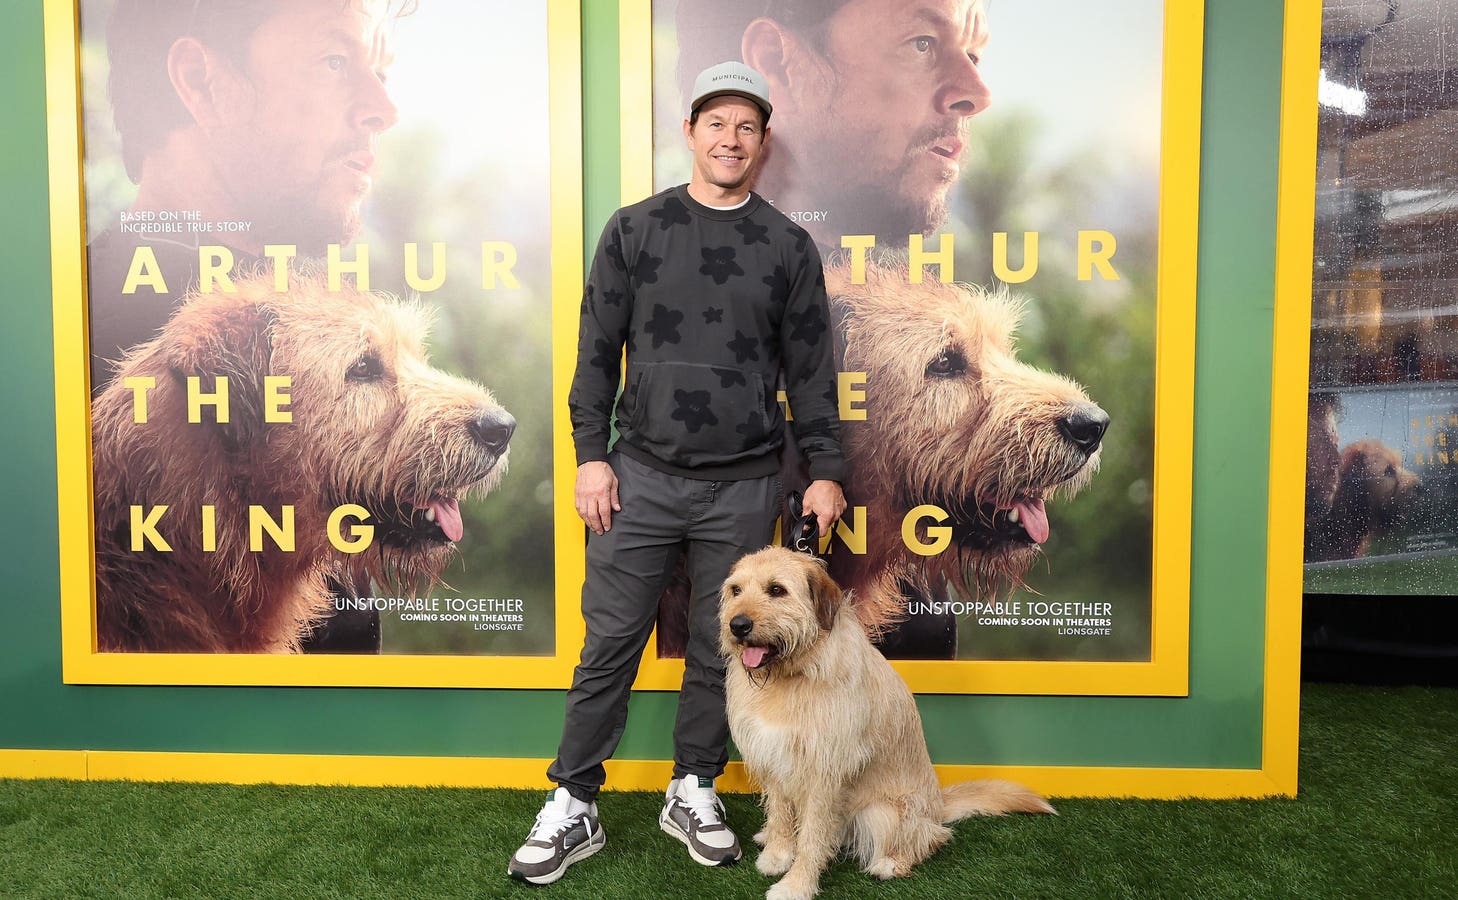 Is ‘Arthur The King’ Streaming? Here Are Ways To Watch Mark Wahlberg’s Dog Movie Online